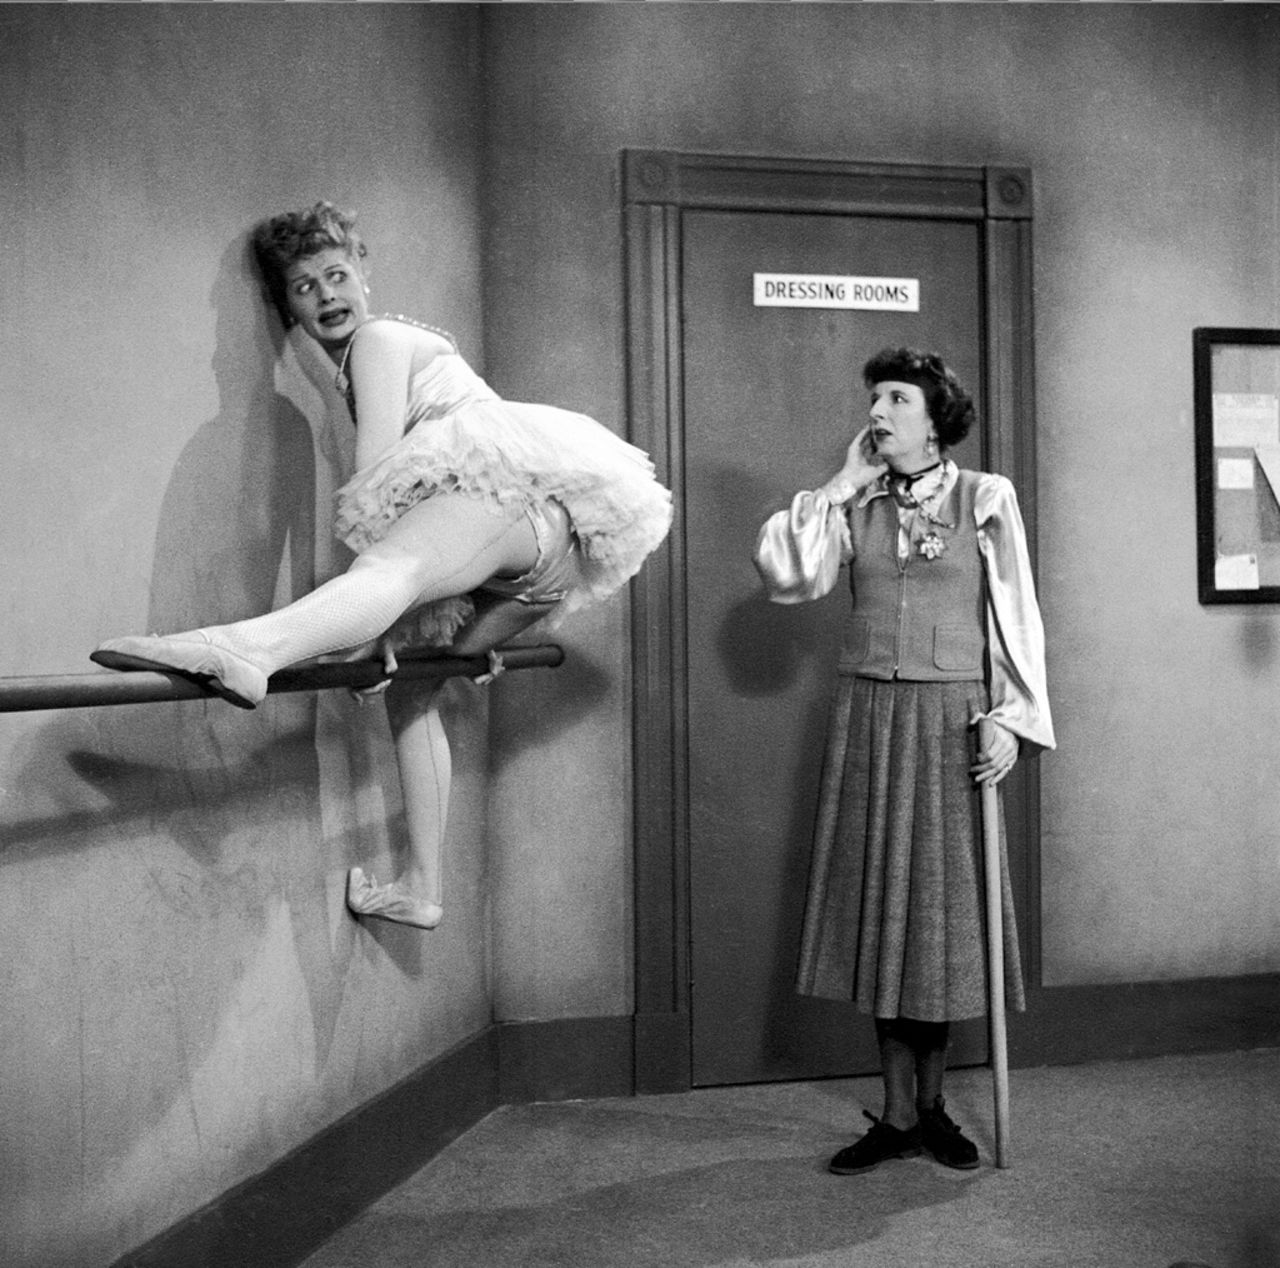 Madame Lemonde, played by Mary Wickes, looks bewildered as Lucy gets stuck on a ballet barre in the same episode. Ball, who starred in several films and musicals before the debut of her show, actually had dance experience.